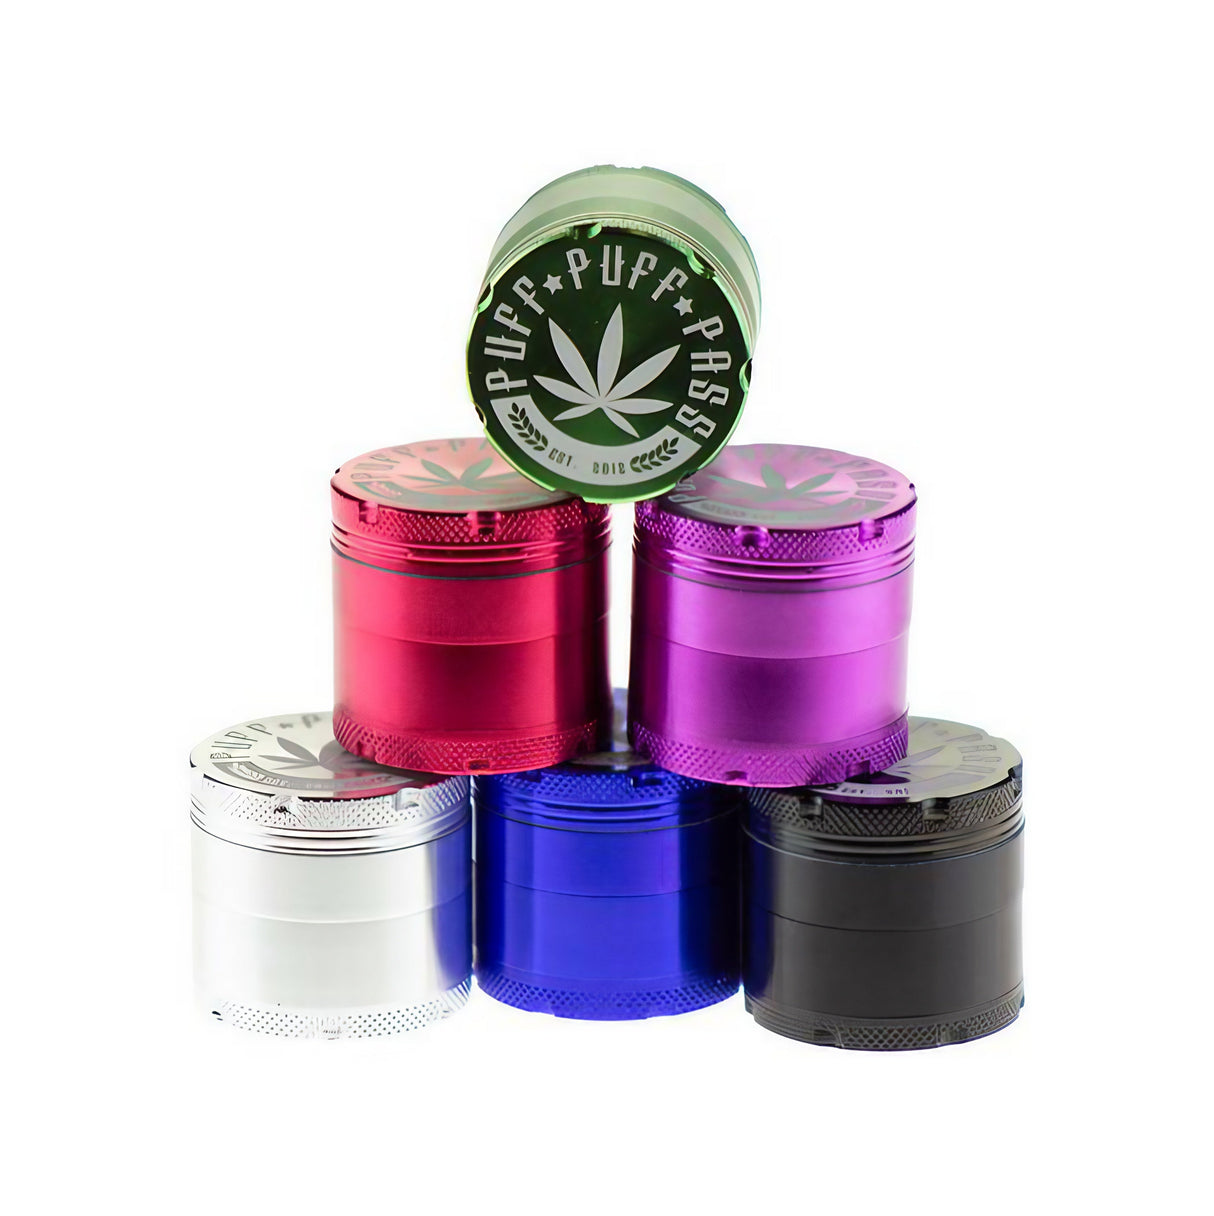 Puff Puff Pass 3-Part Aluminum Grinders in assorted colors, compact 40mm size, front view